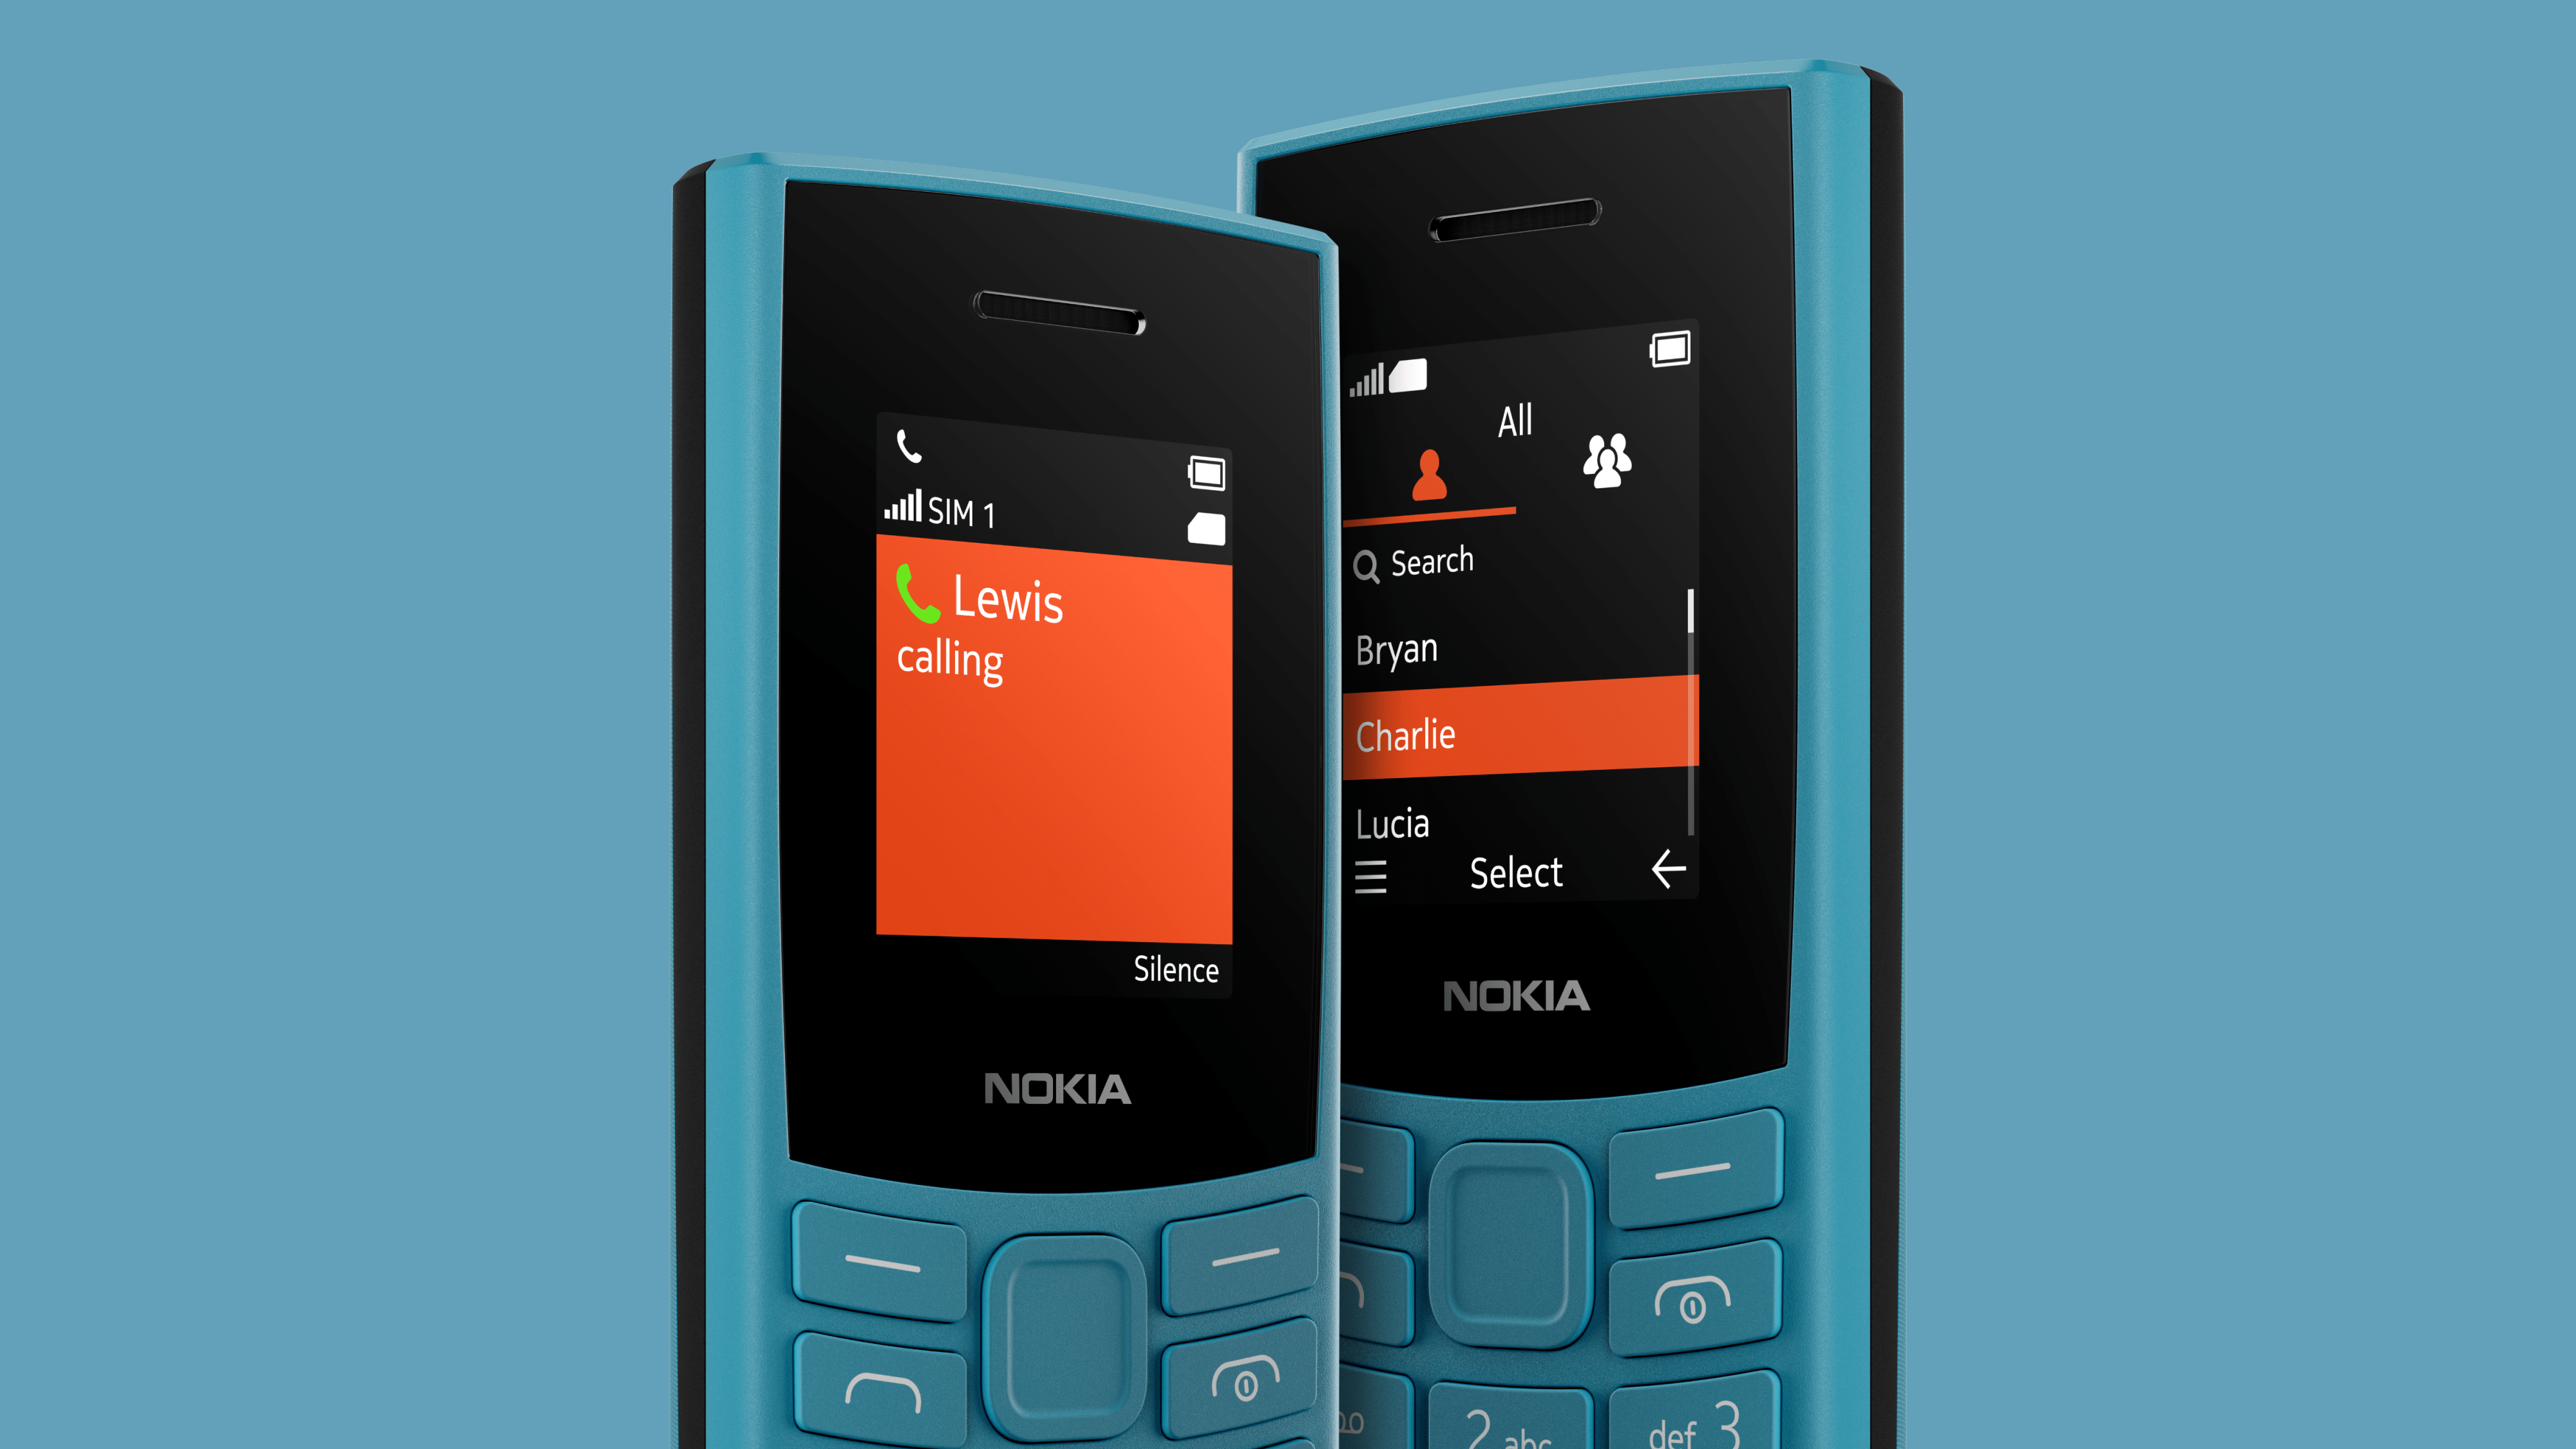 Nokia 105 feature 4G internet with phone